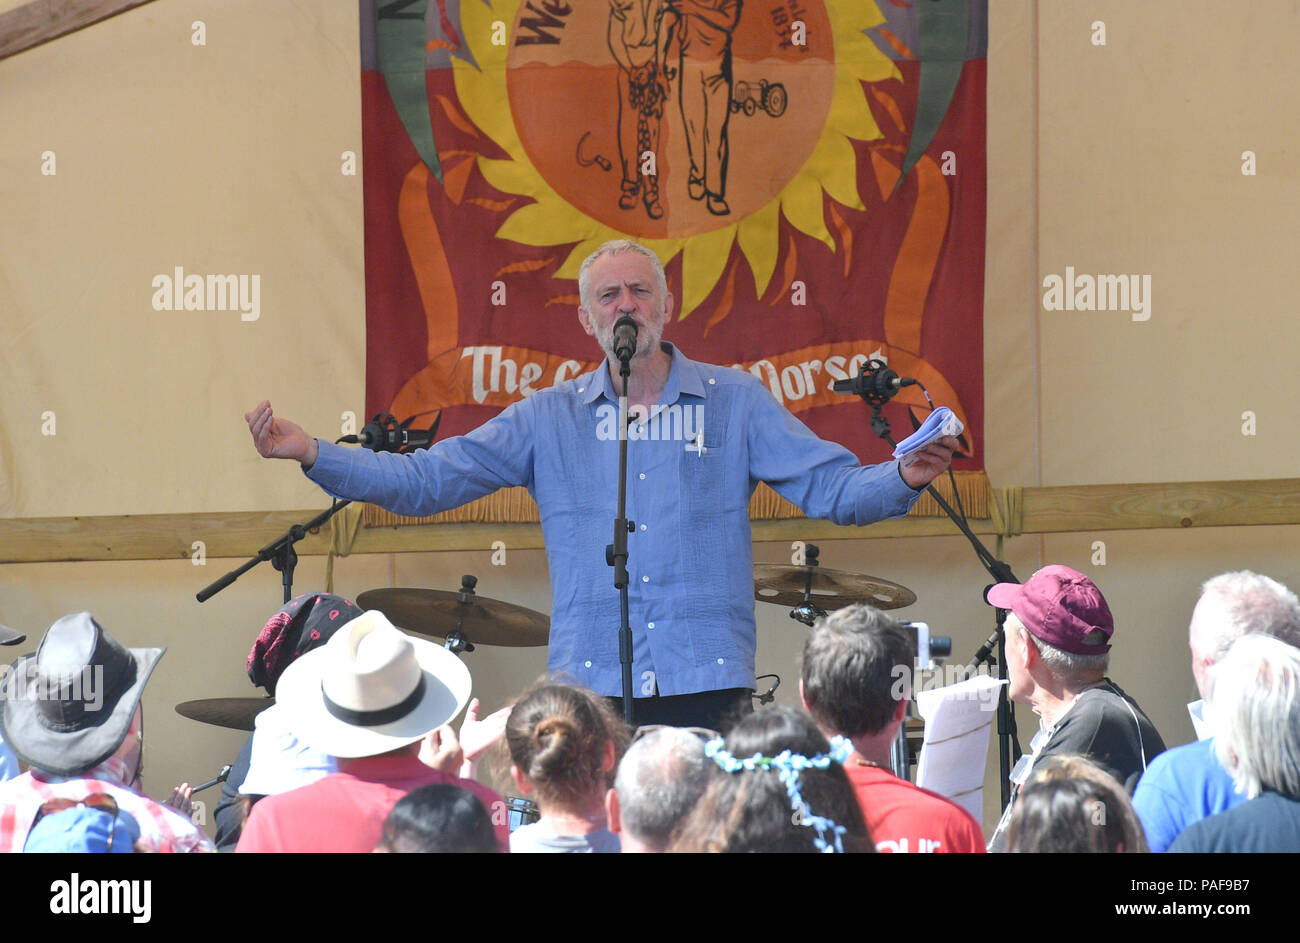 Labour leader Jeremy Corbyn speaking at the Tolpuddle Martyrs Festival in Tolpuddle, Dorset. Stock Photo